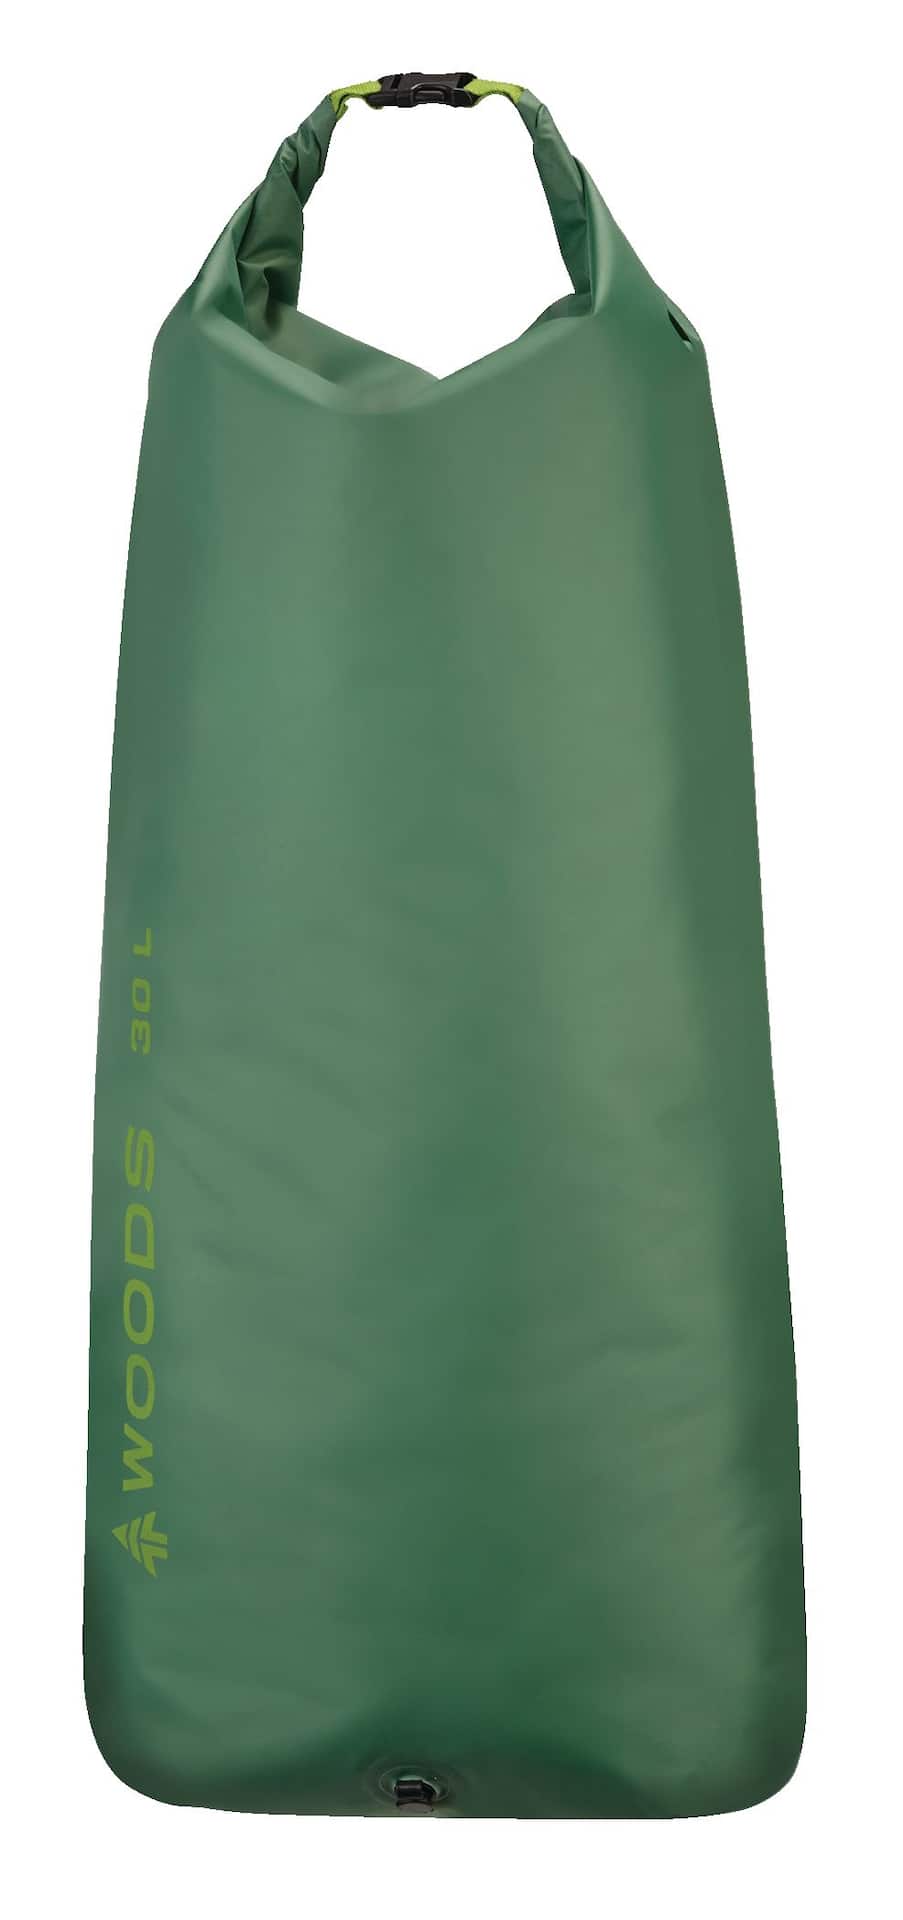 Woods Lightweight Waterproof Dry Bag w/ Valve For Camping, Hiking  Water  Sports, 30-L, Green Canadian Tire